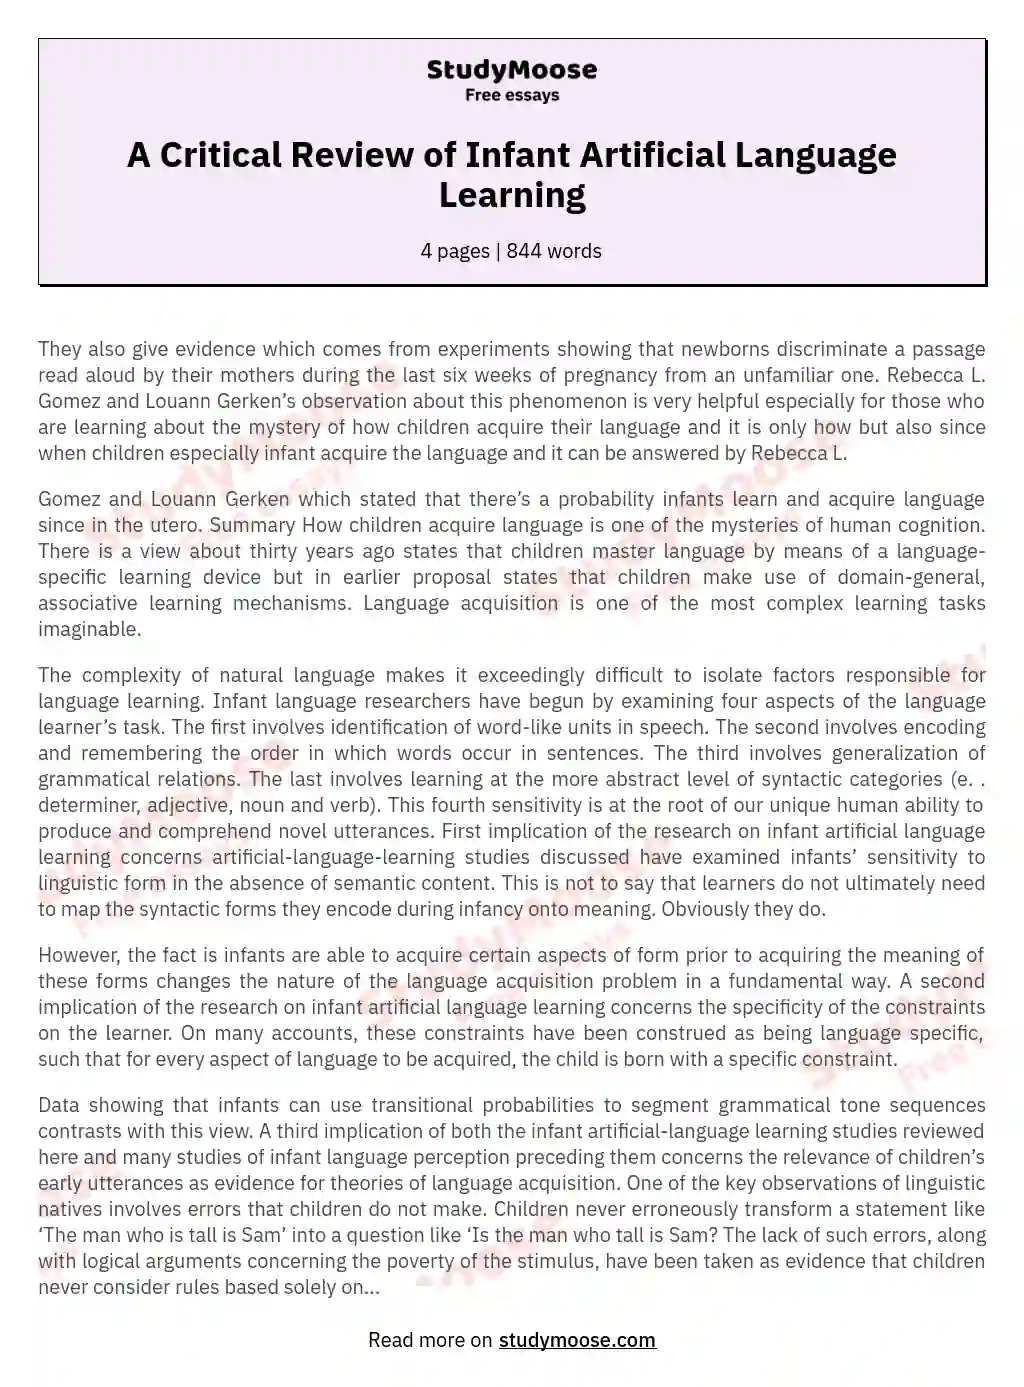 A Critical Review of Infant Artificial Language Learning essay